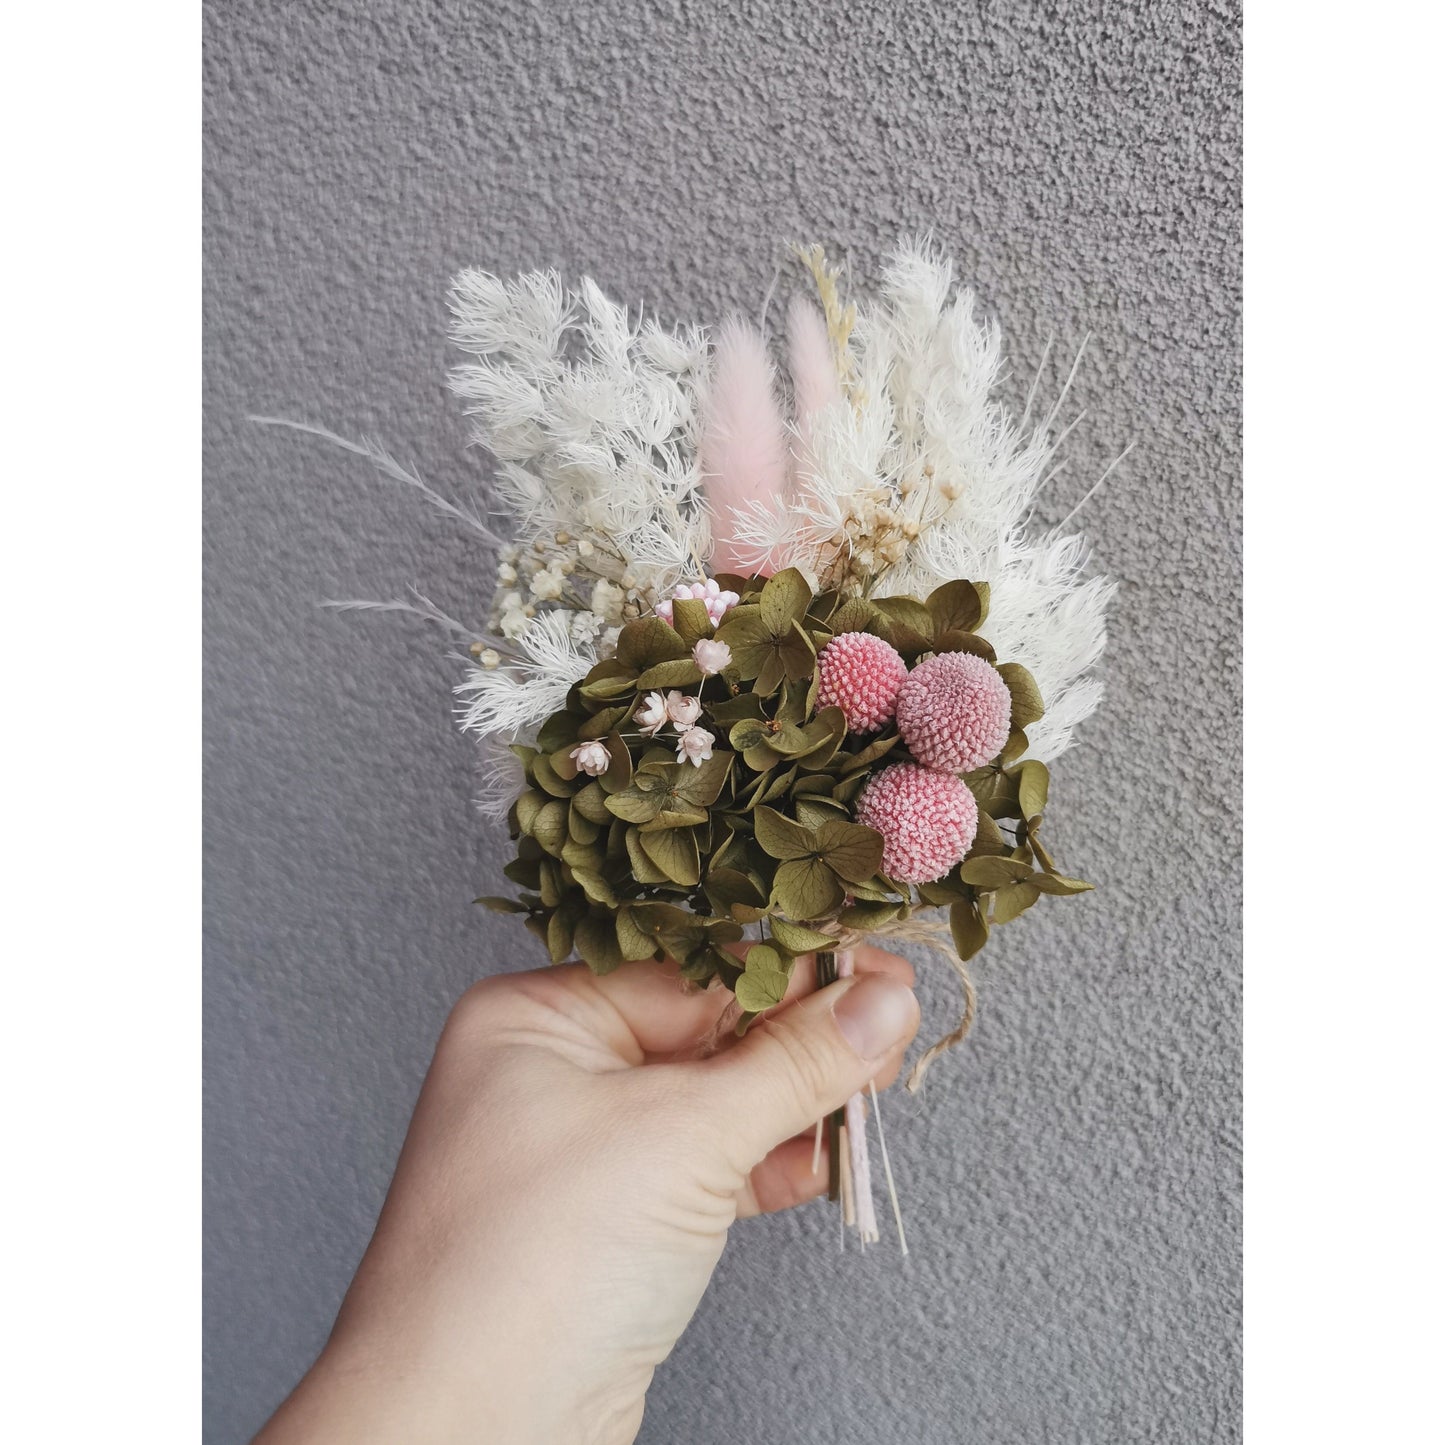 Gift Box Hamper with 2x soy wax melts, pink peony candle &  pink, green & white dried flower posy. Photo shows the dried flower posy being held by hand against a blank wall